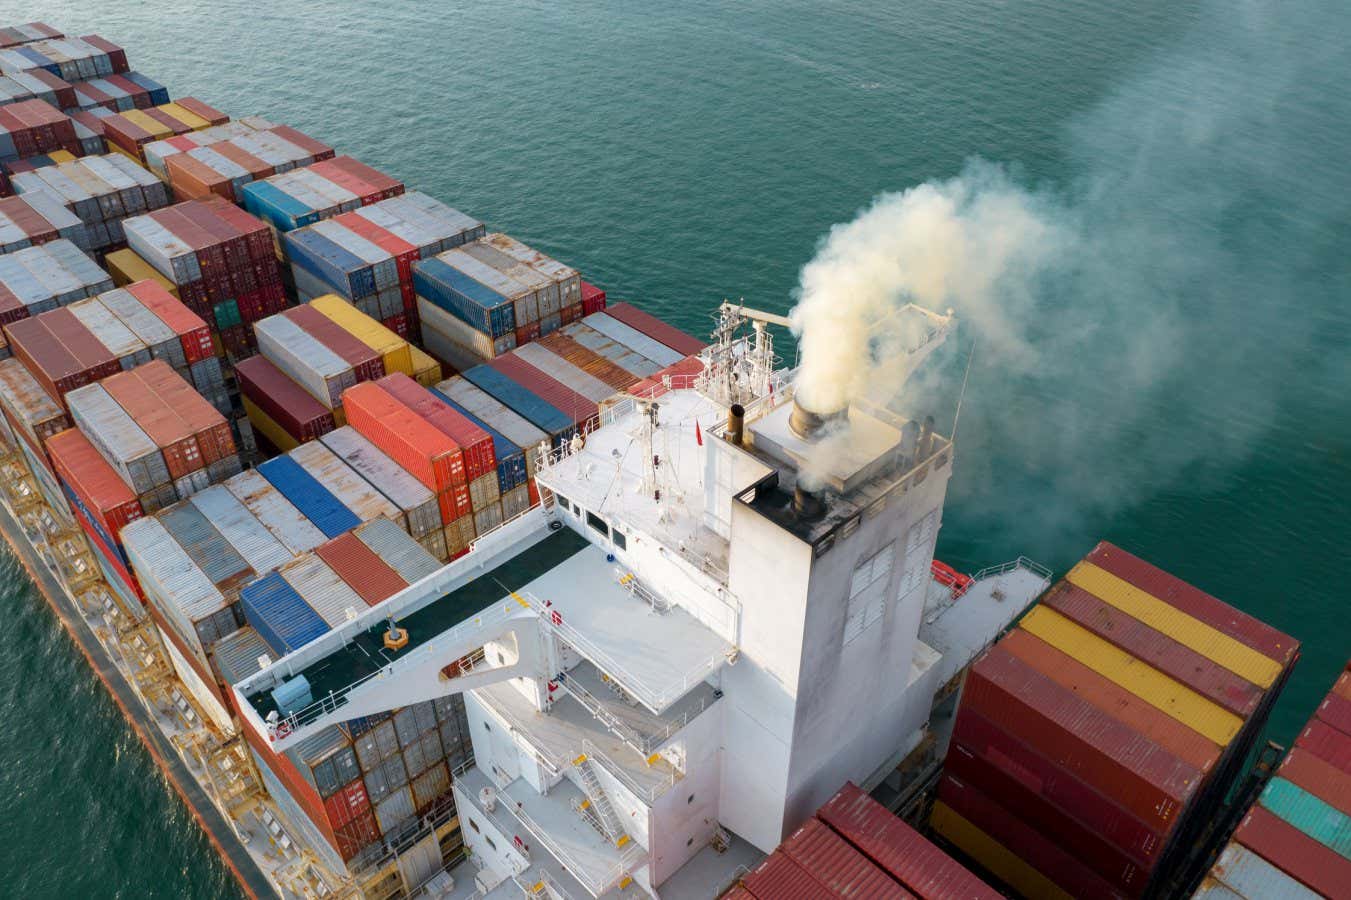 A container ship just tested a system to capture its own CO2 emissions